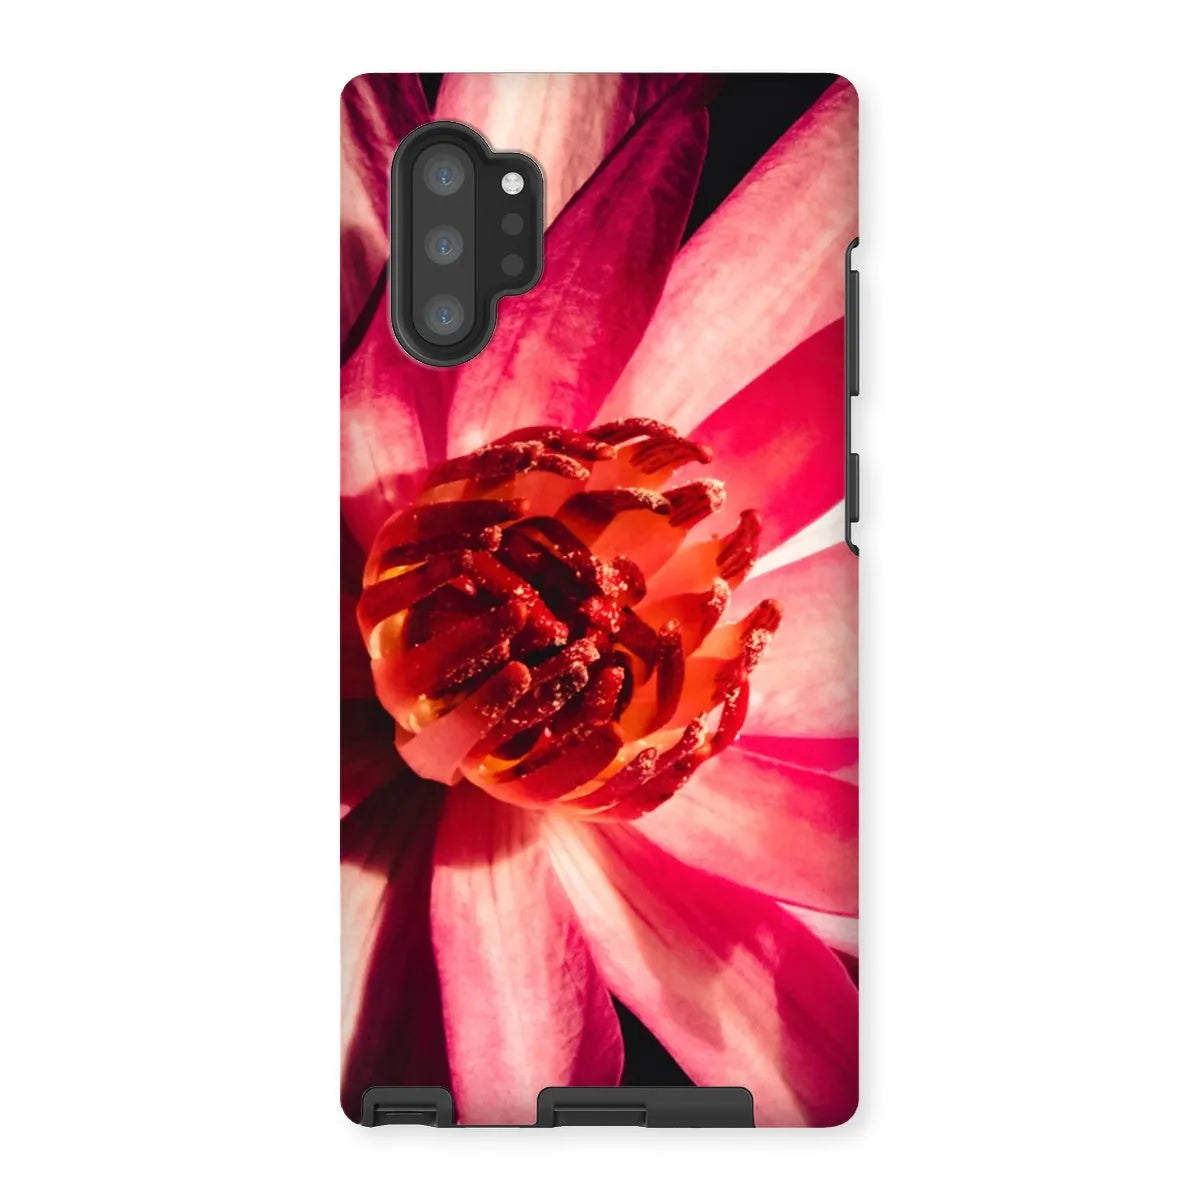 Casanova - Pink Red Lotus Flower Art Photography Phone Case - Samsung Galaxy Note 10p / Matte - Mobile Phone Cases